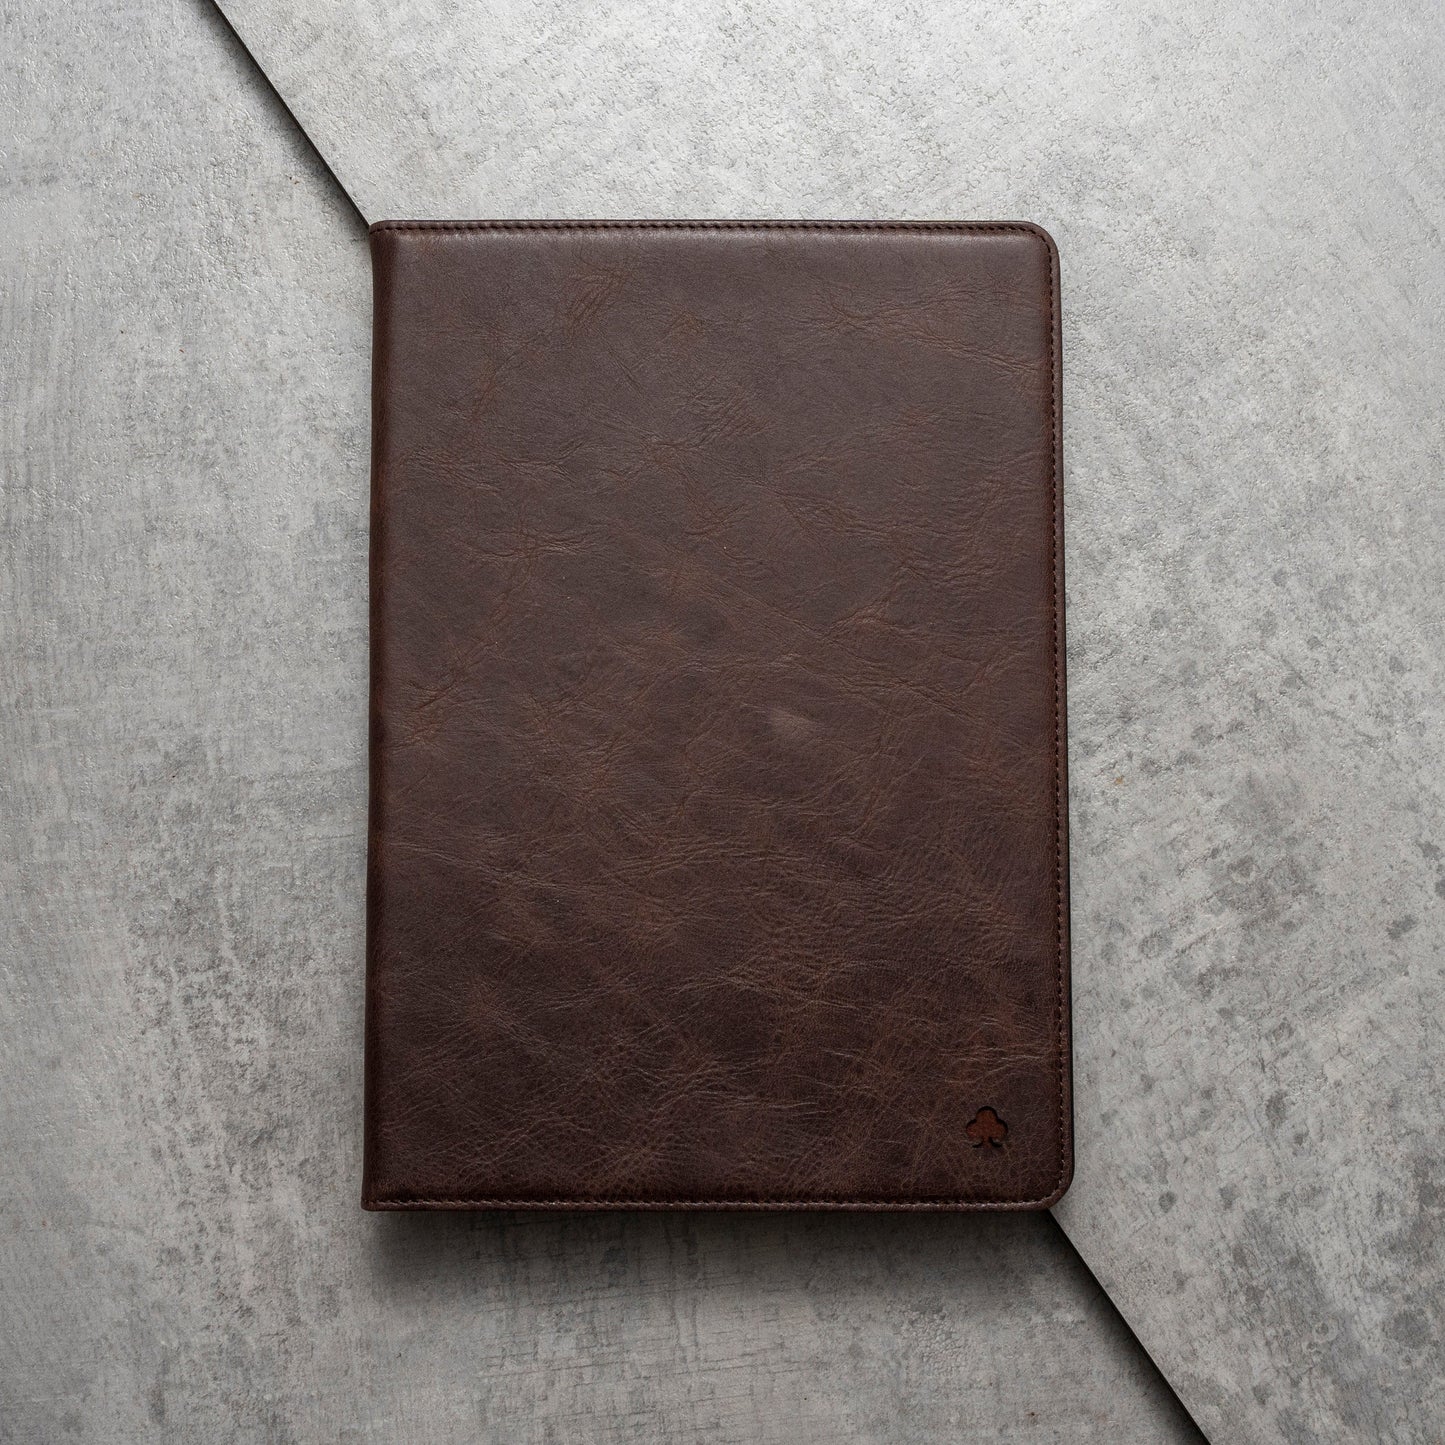 iPad Air 10.5" 3rd Generation 2019 Release Leather Case. Premium Genuine Leather Stand/Cover/Flip Case (Chocolate Brown)